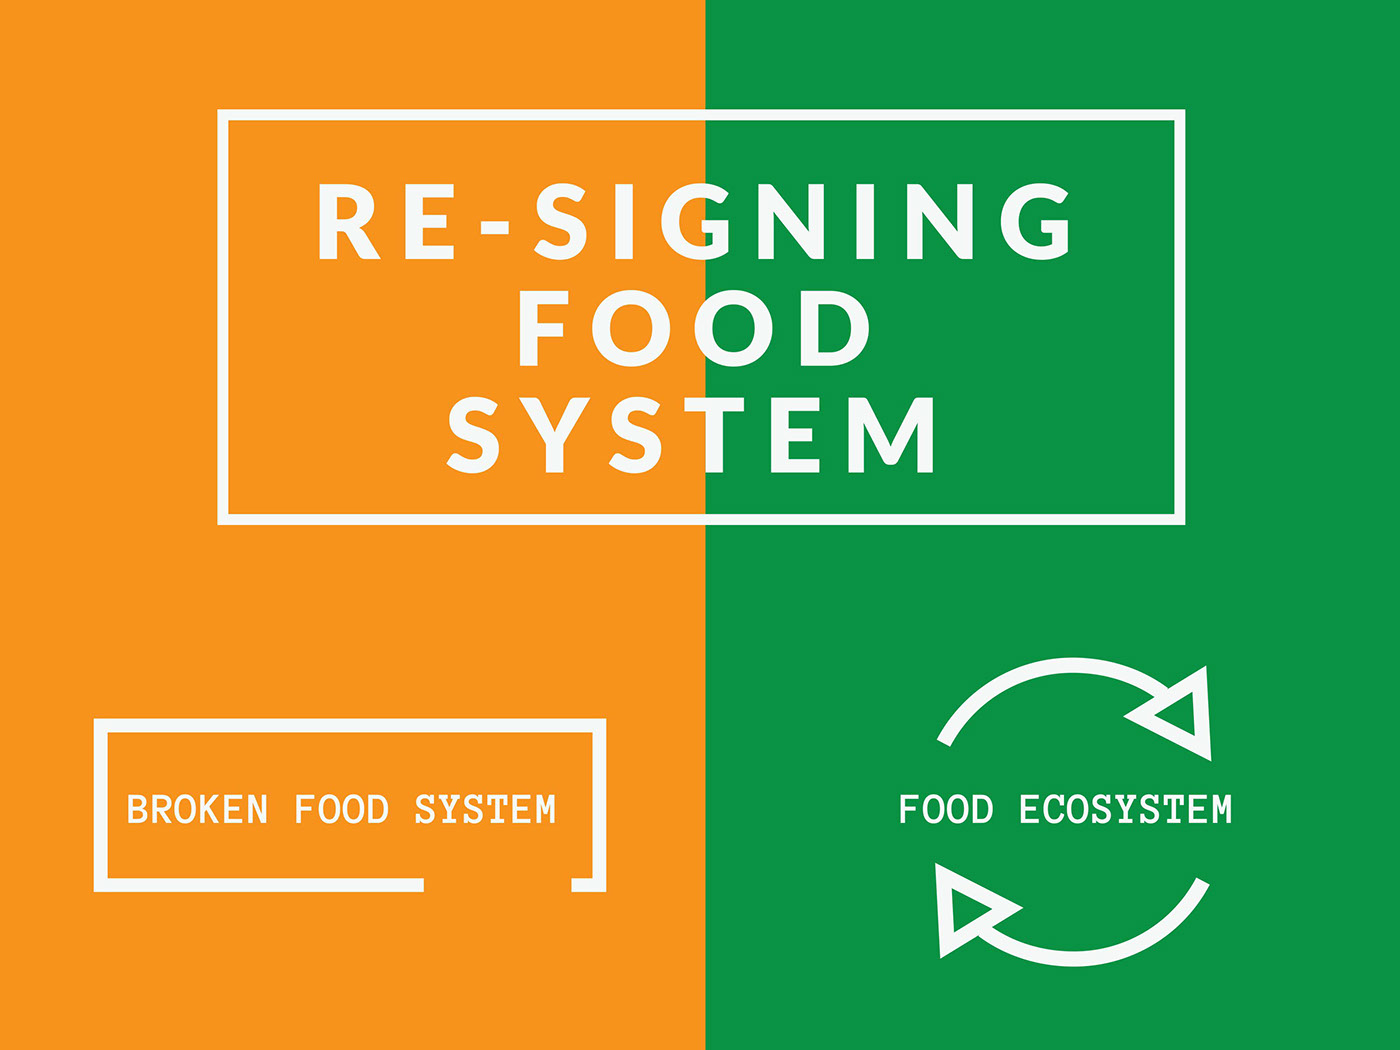 Food waste food cycle food system product service system food tribe food waste sucks Food  Los Angeles